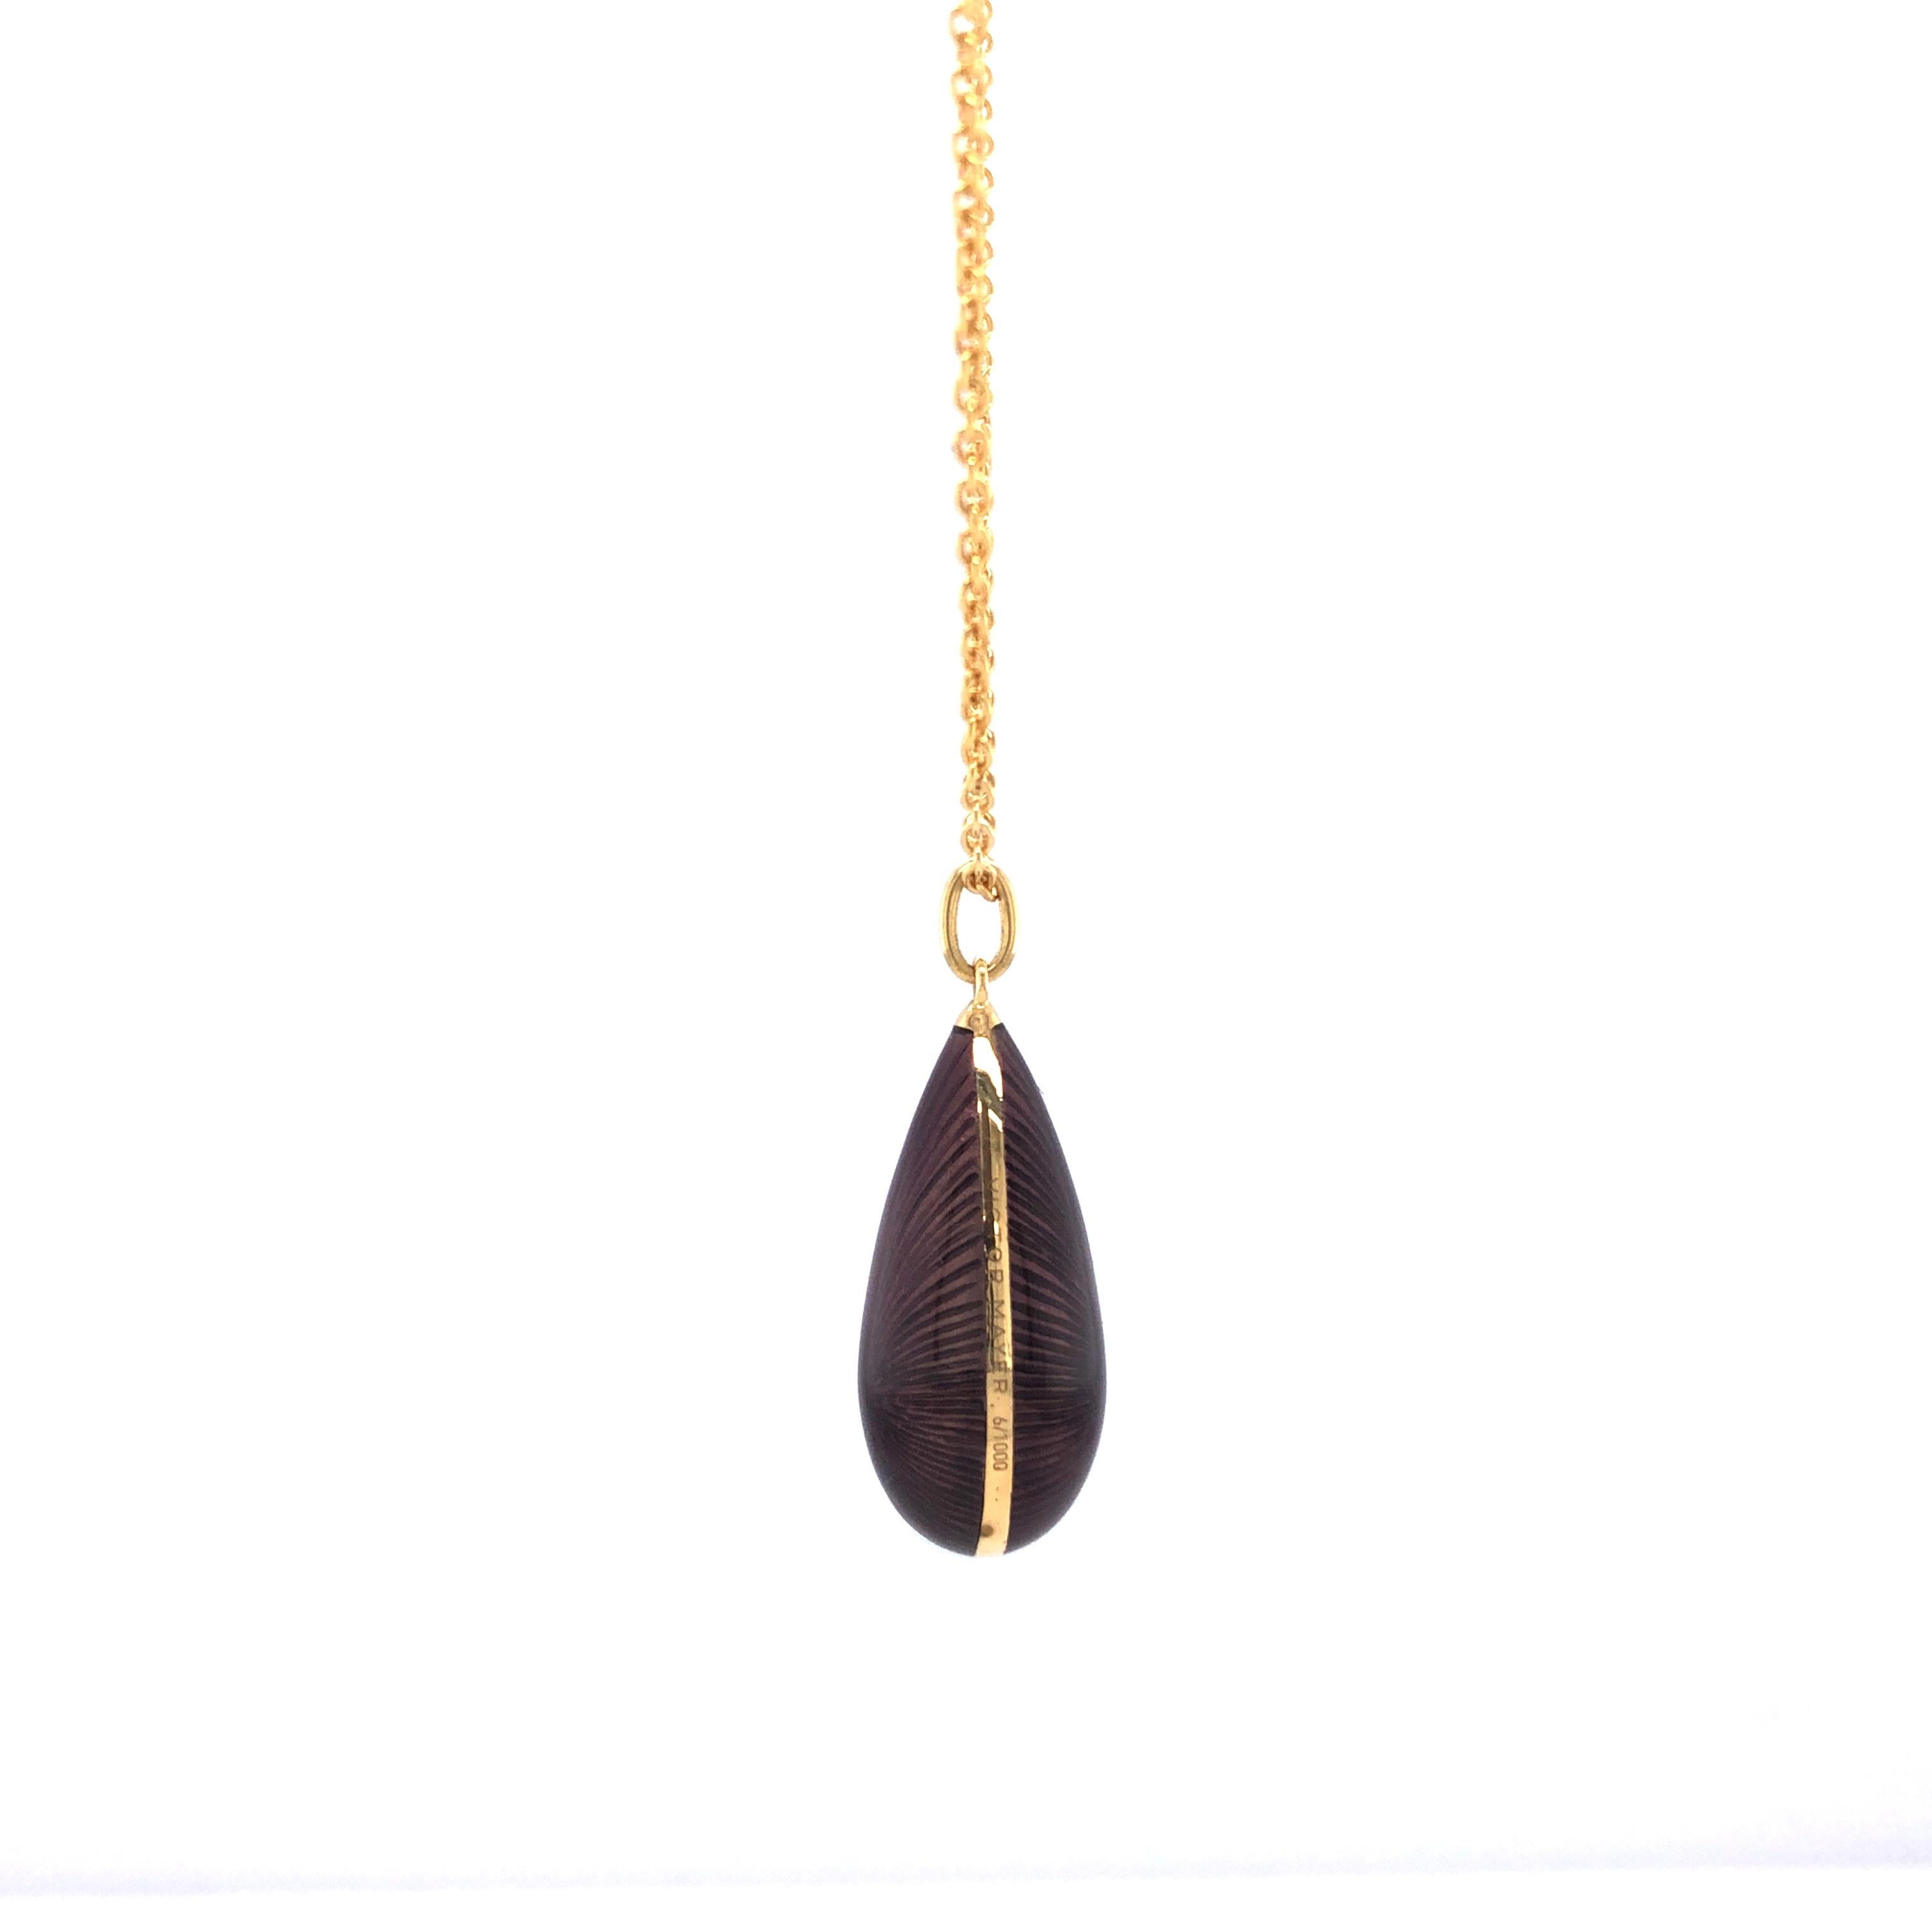 Victor Mayer drop pendant 18k yellow gold, Dew Drop Collection, translucent purple vitreous enamel, guilloche, measurements app. 28.0 mm x 10.0 mm

About the creator Victor Mayer
Victor Mayer is internationally renowned for elegant timeless designs